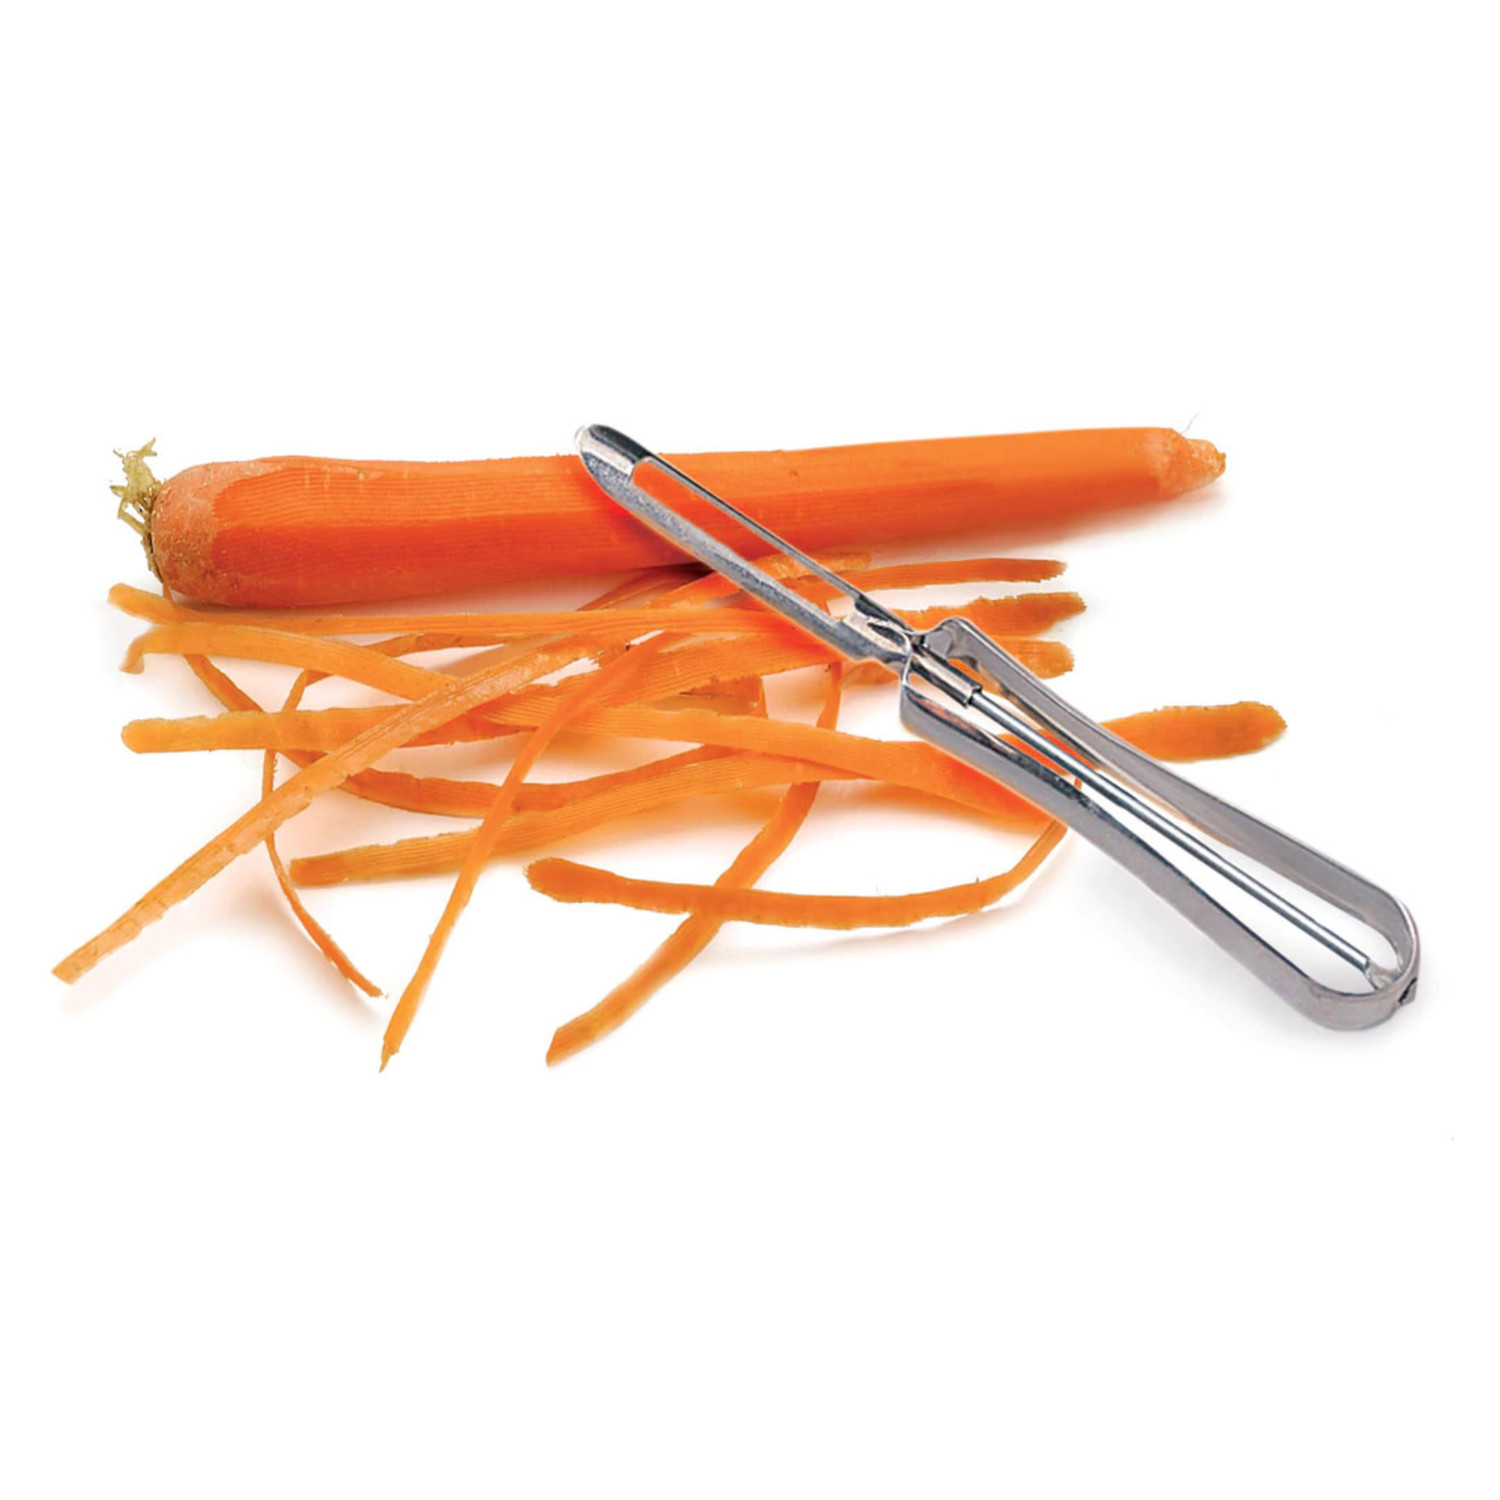 Stainless Steel Fruit and Vegetable Swivel Peeler - The Vermont Country Store